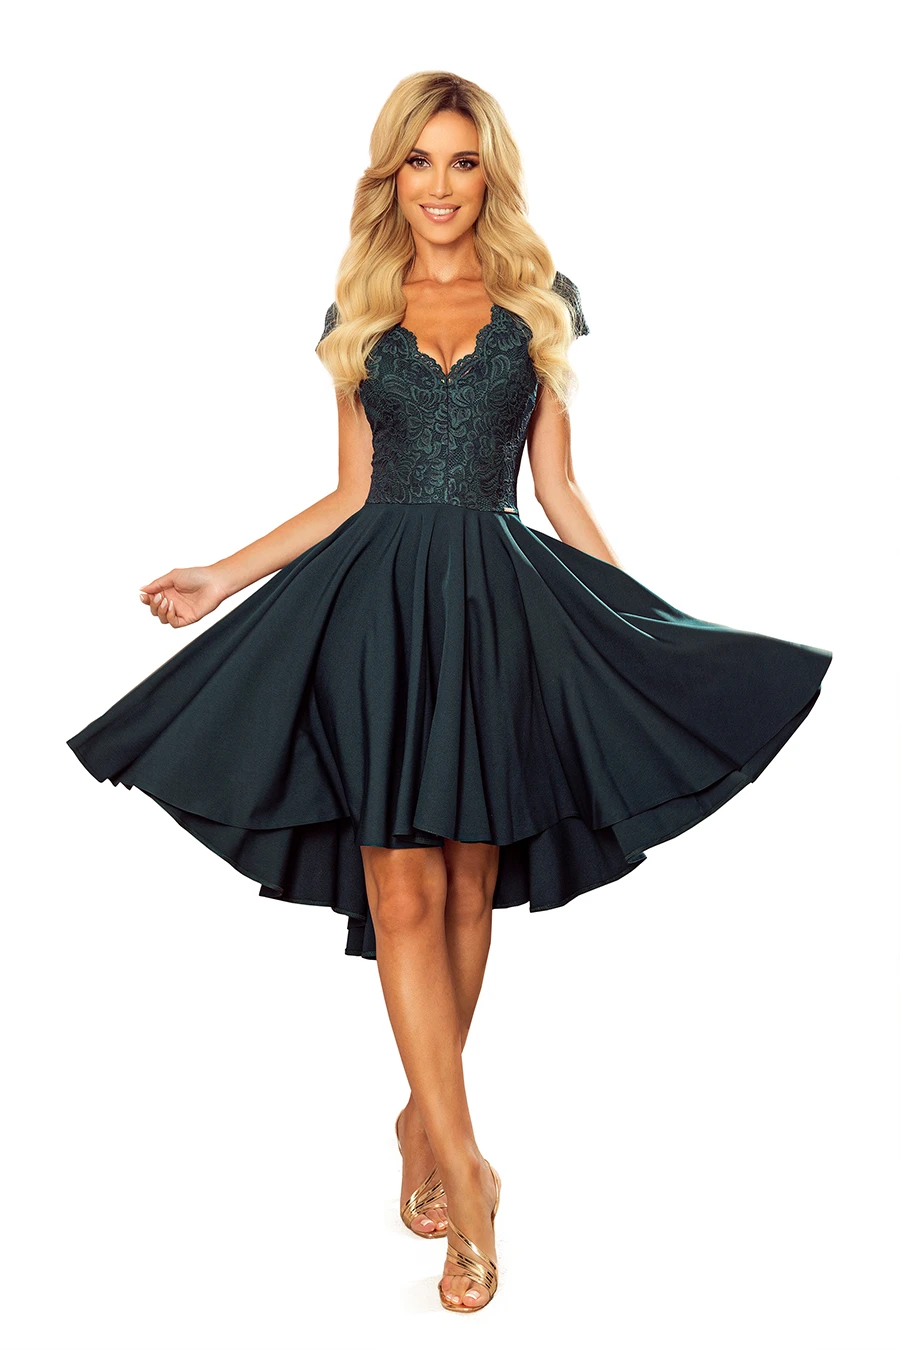 300-5 PATRICIA - dress with longer back with lace neckline - green color